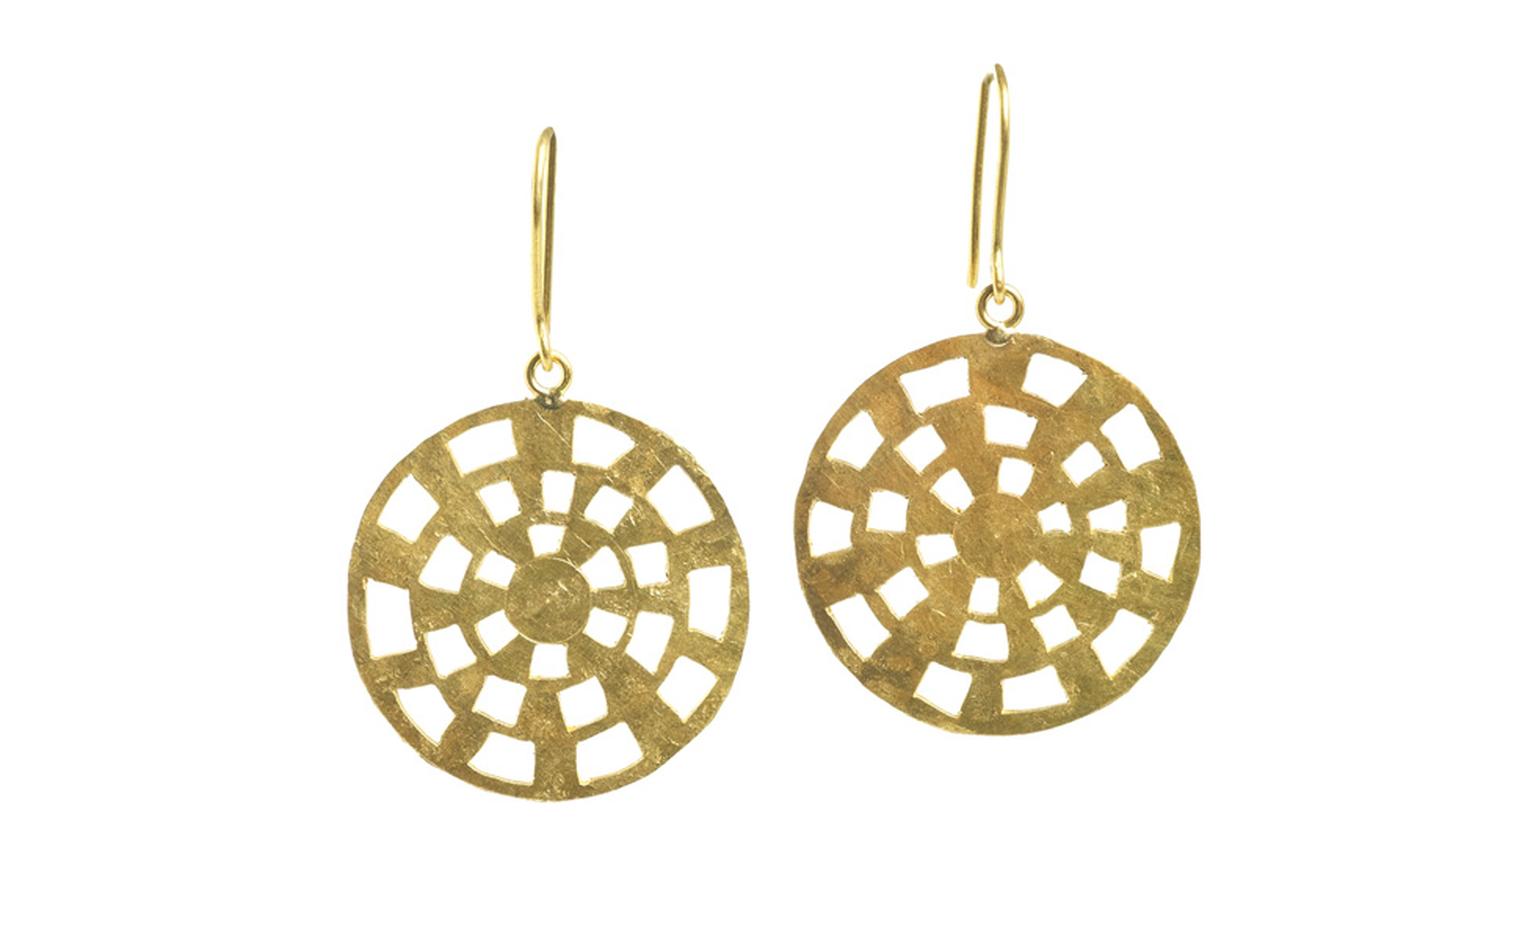 Pippa Small Fairtrade gold earrings. These disc earrings capture the boho chic feel of Pippa's jewels, and none more so than these earrings with a squeaky clean conscience.